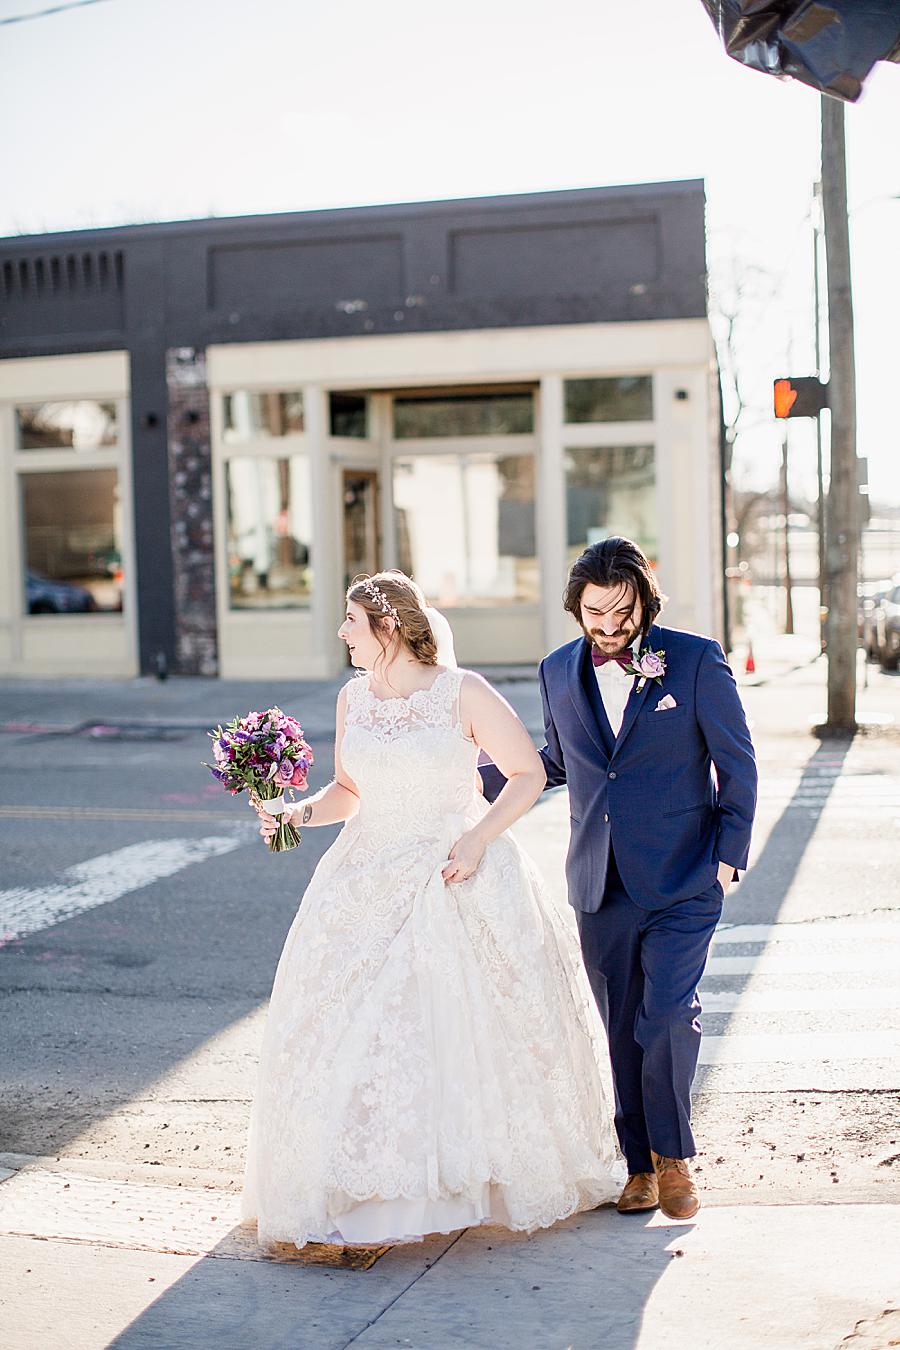 Downtown Knoxville at this Relix Theater Wedding by Knoxville Wedding Photographer, Amanda May Photos.